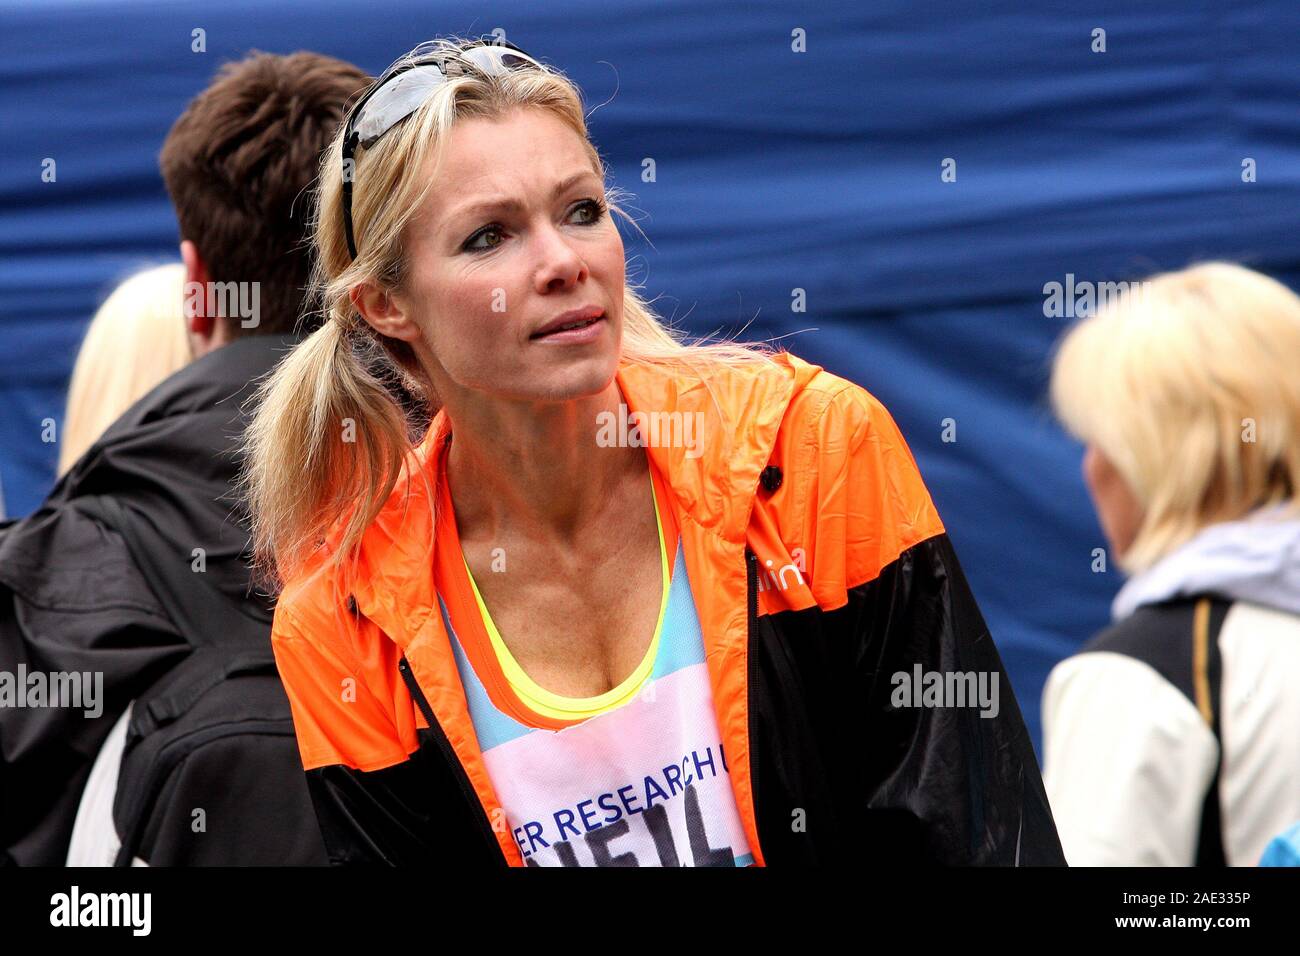 Nell McAndrew, Bupa Great Manchester Run 2012 Banque D'Images